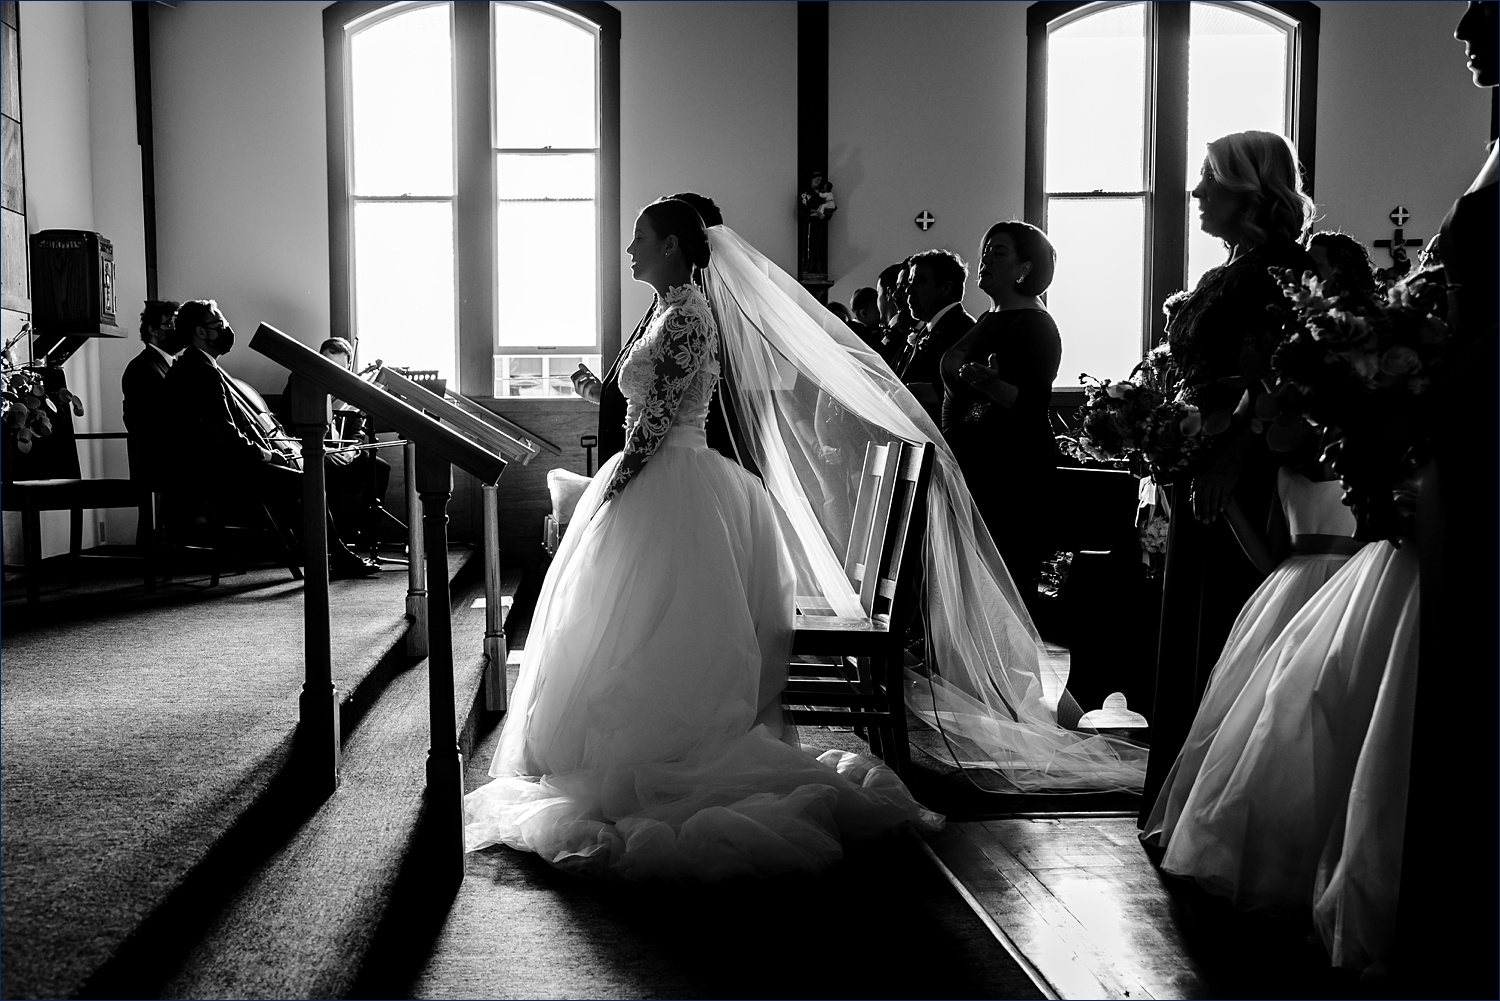 The wedding ceremony in Ogunquit Maine with the couple in silhouette